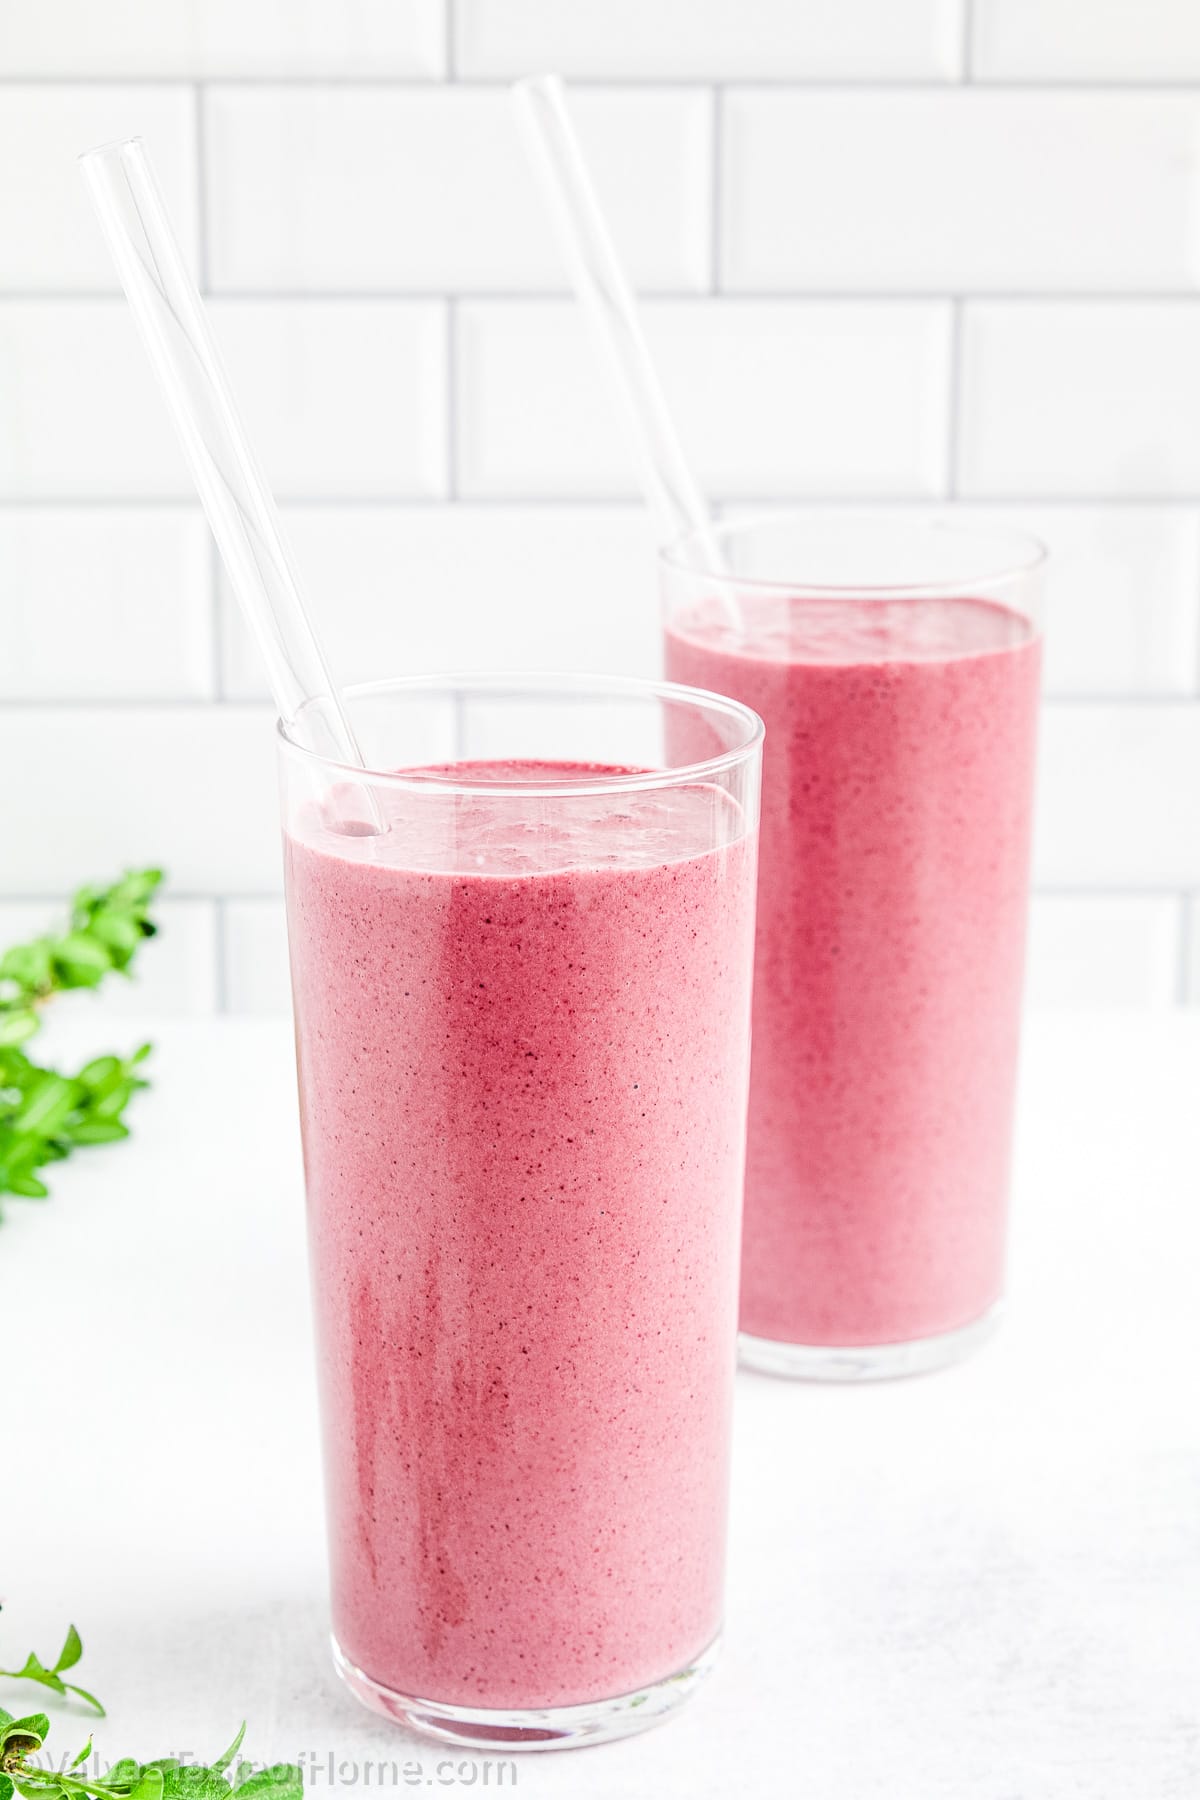 This berry smoothie recipe is a refreshing and healthy option that you can easily prepare at home.